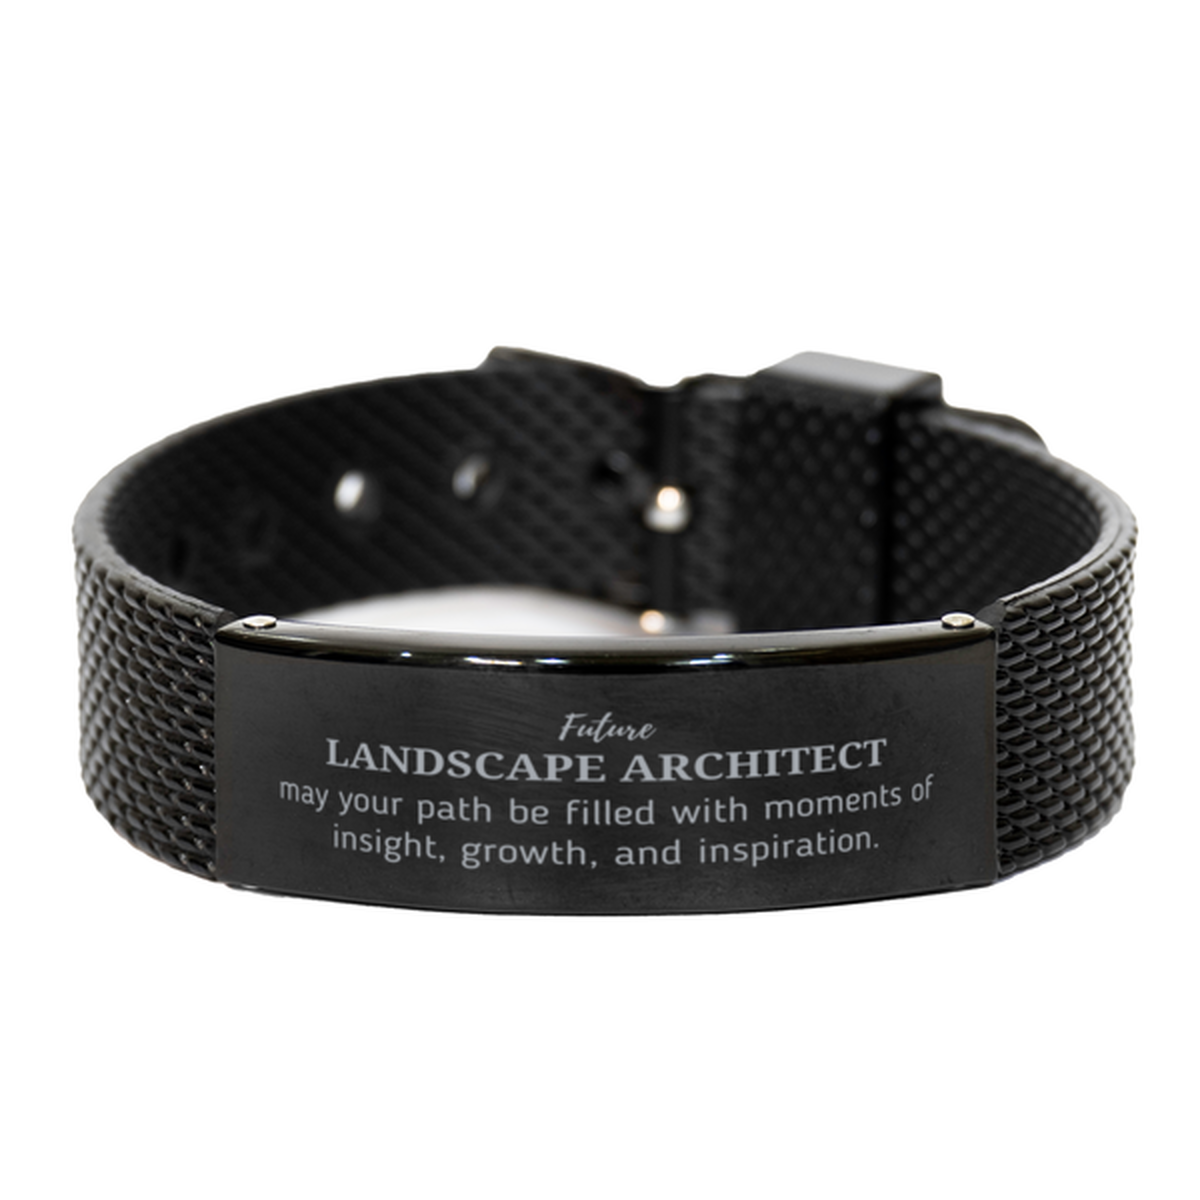 Future Landscape Architect Gifts, May your path be filled with moments of insight, Graduation Gifts for New Landscape Architect, Christmas Unique Black Shark Mesh Bracelet For Men, Women, Friends